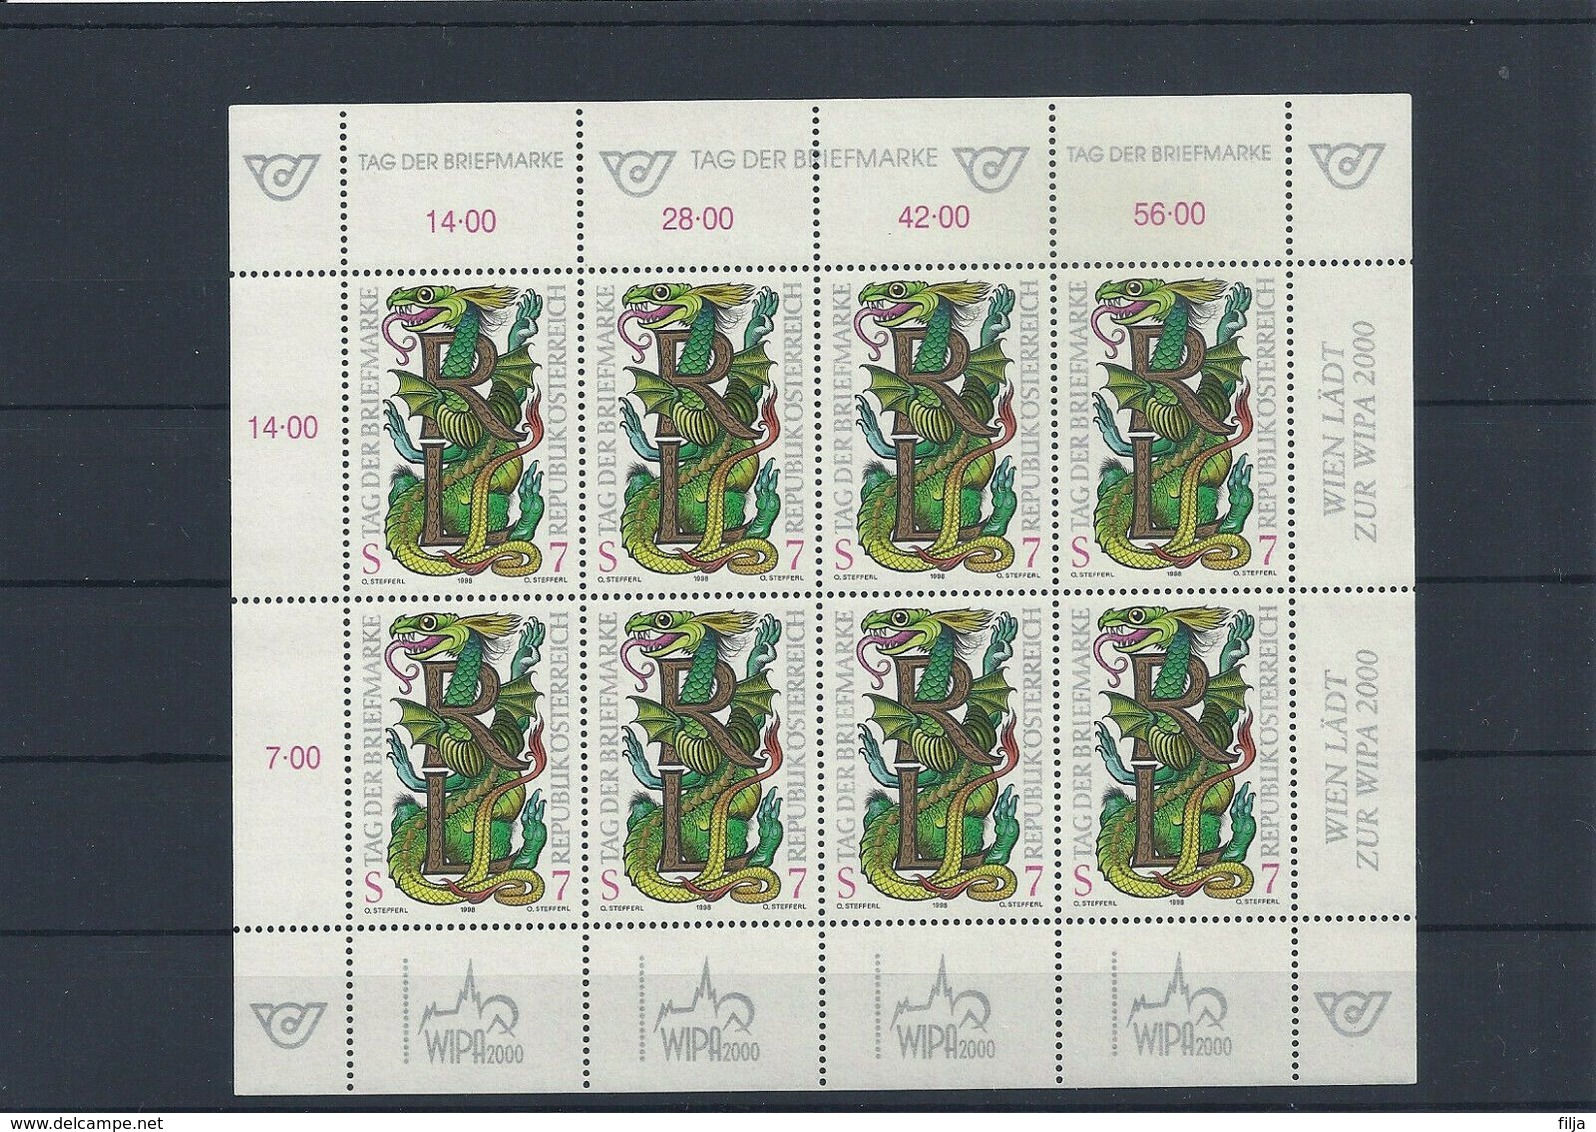 Austria Year 1998 Day The Stamp MNH ** - Nuevos